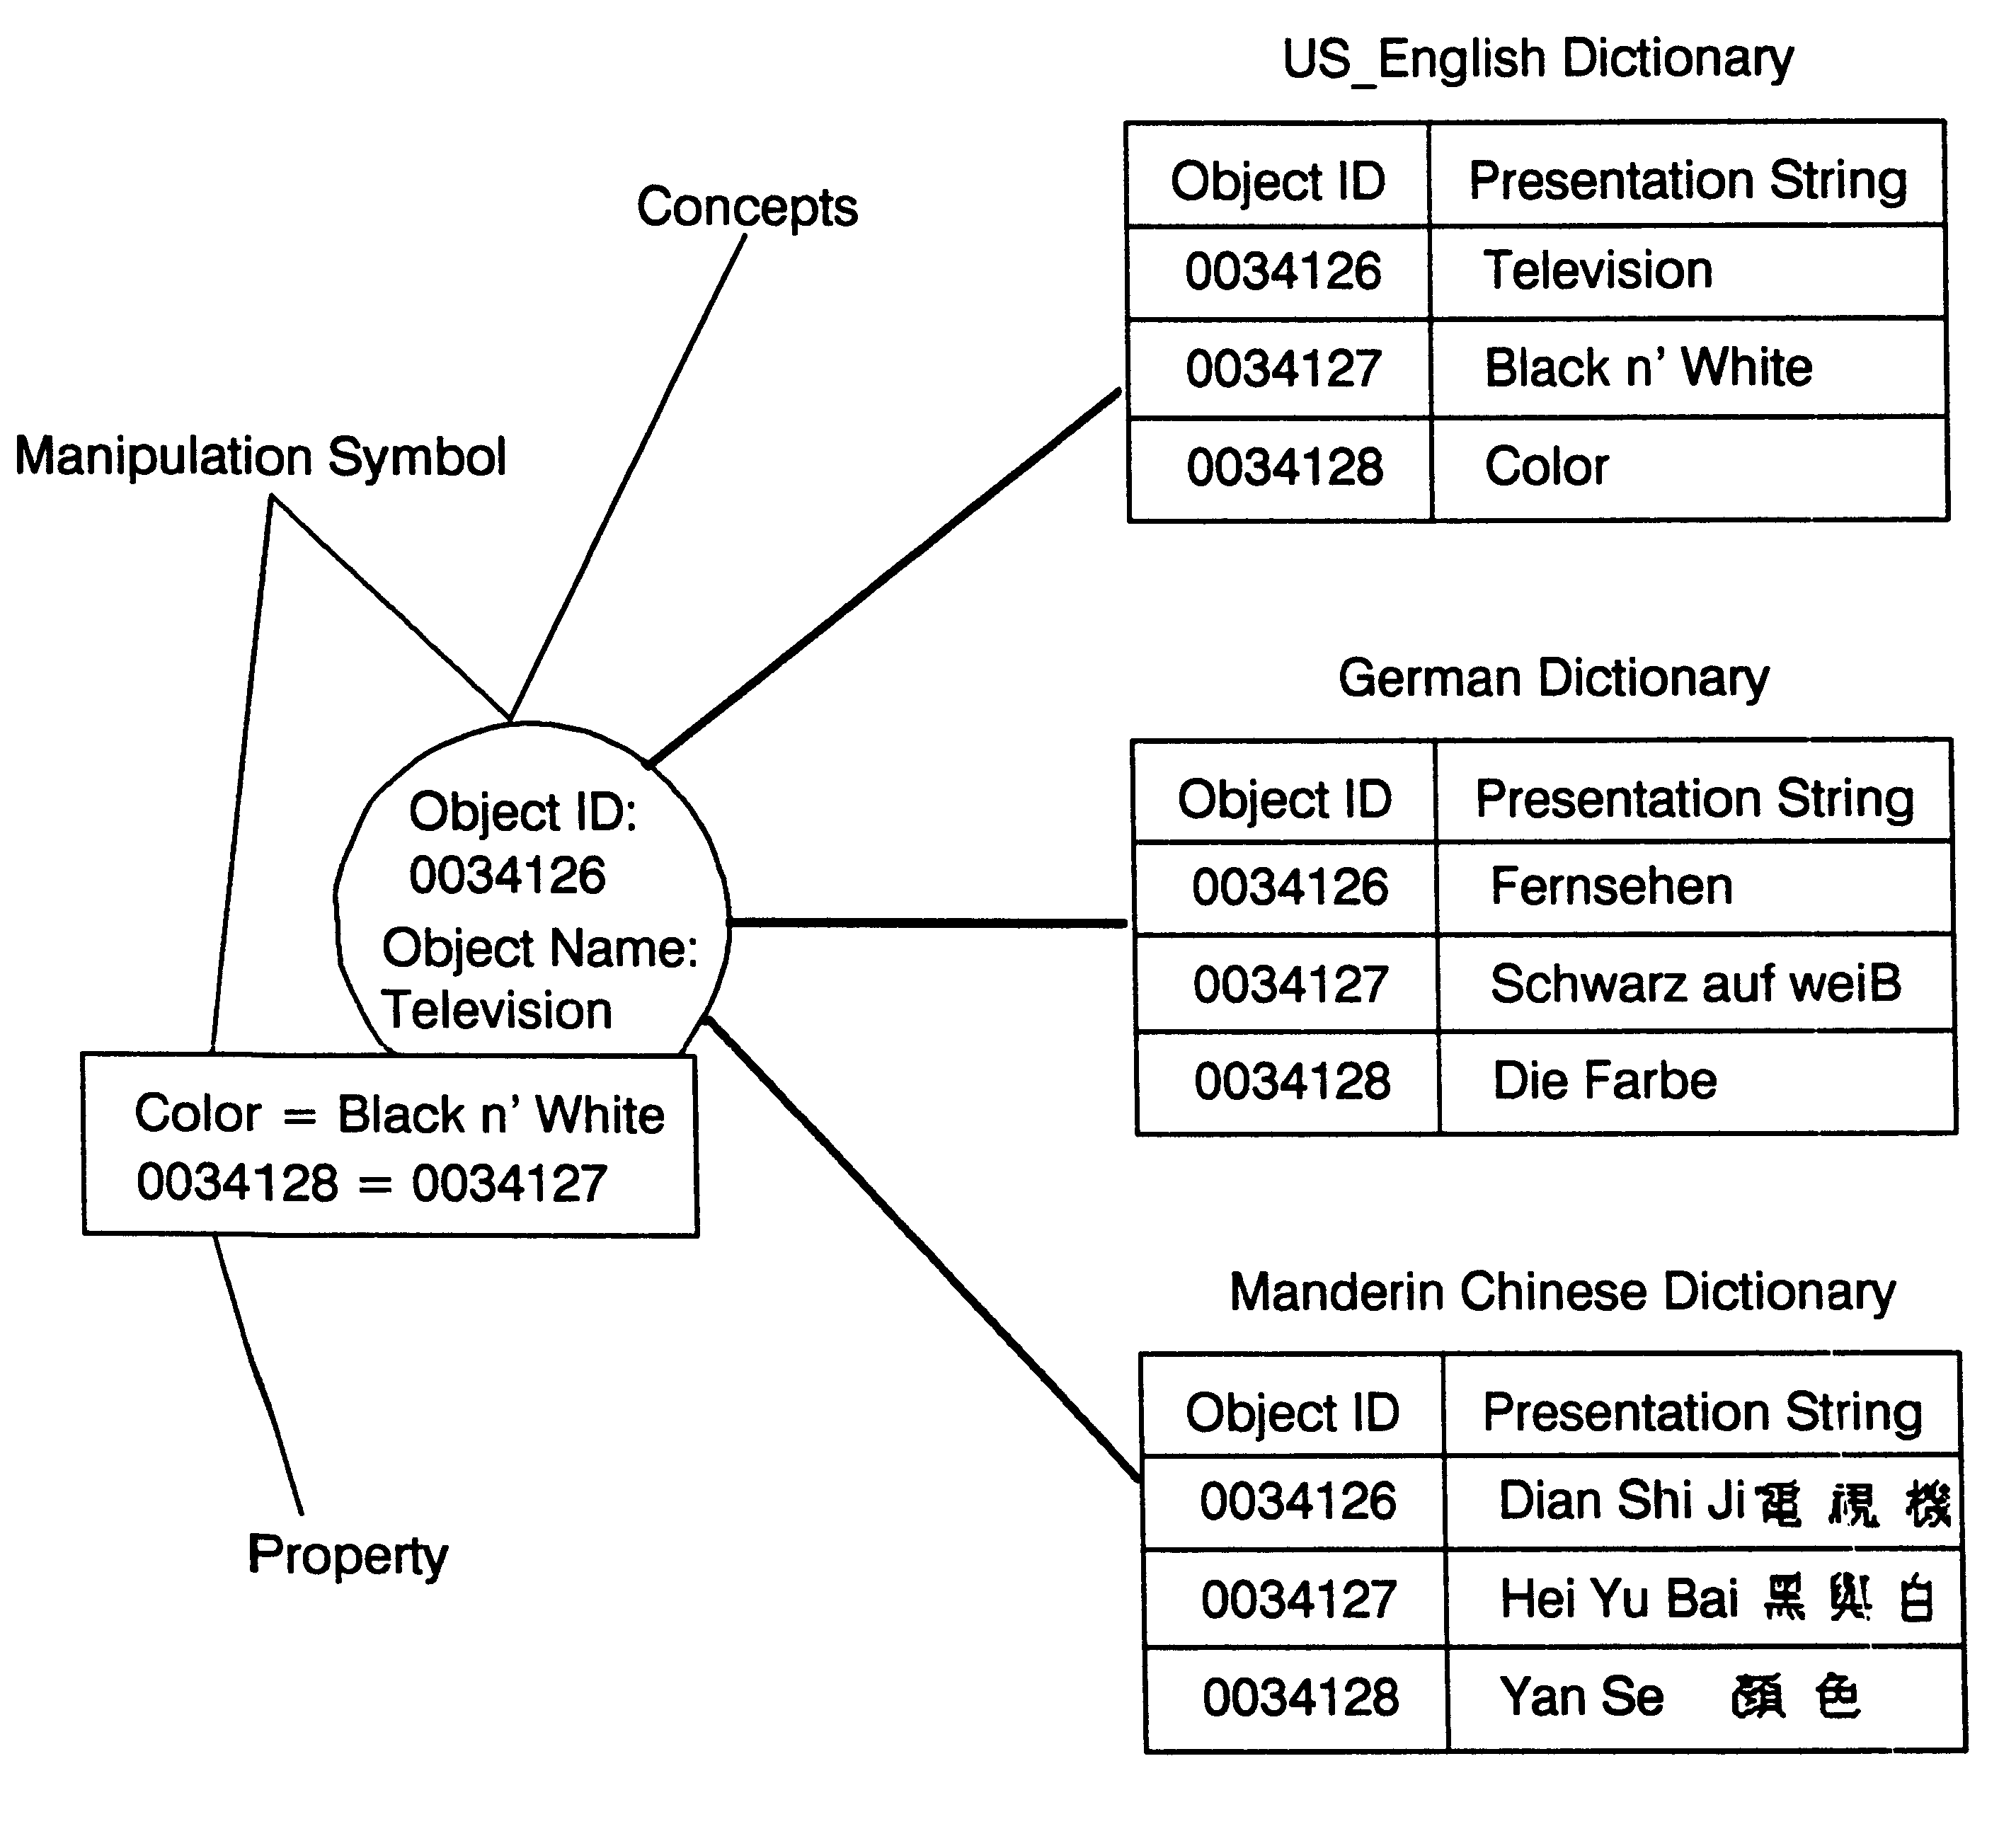 System for the facilitation of supporting multiple concurrent languages through the use of semantic knowledge representation